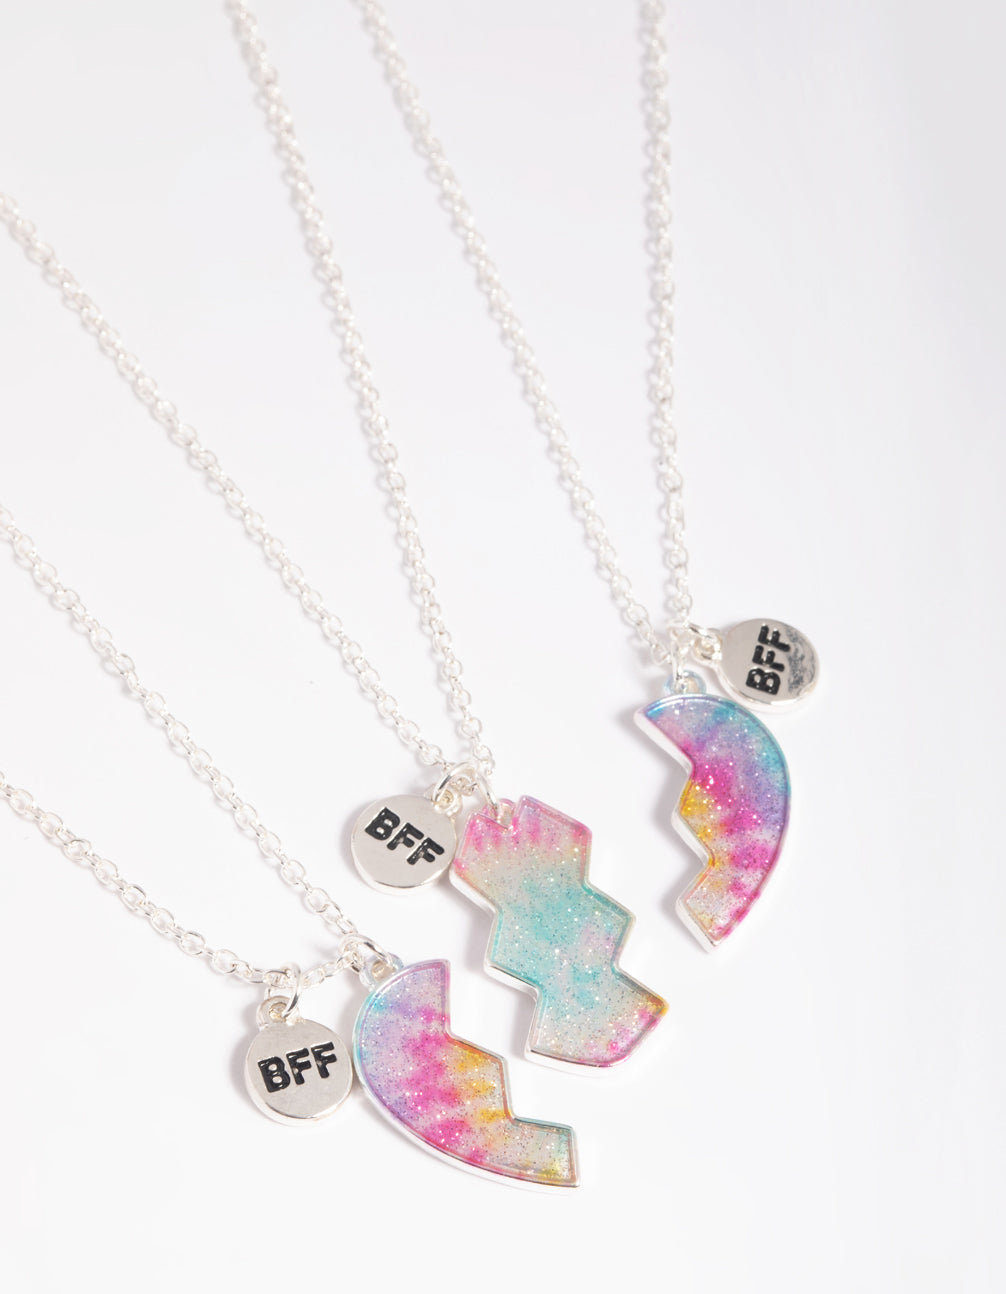 New Claire's Rainbow Heart Love Best Friend BFF Necklaces Pride Jewelry Lot  | eBay